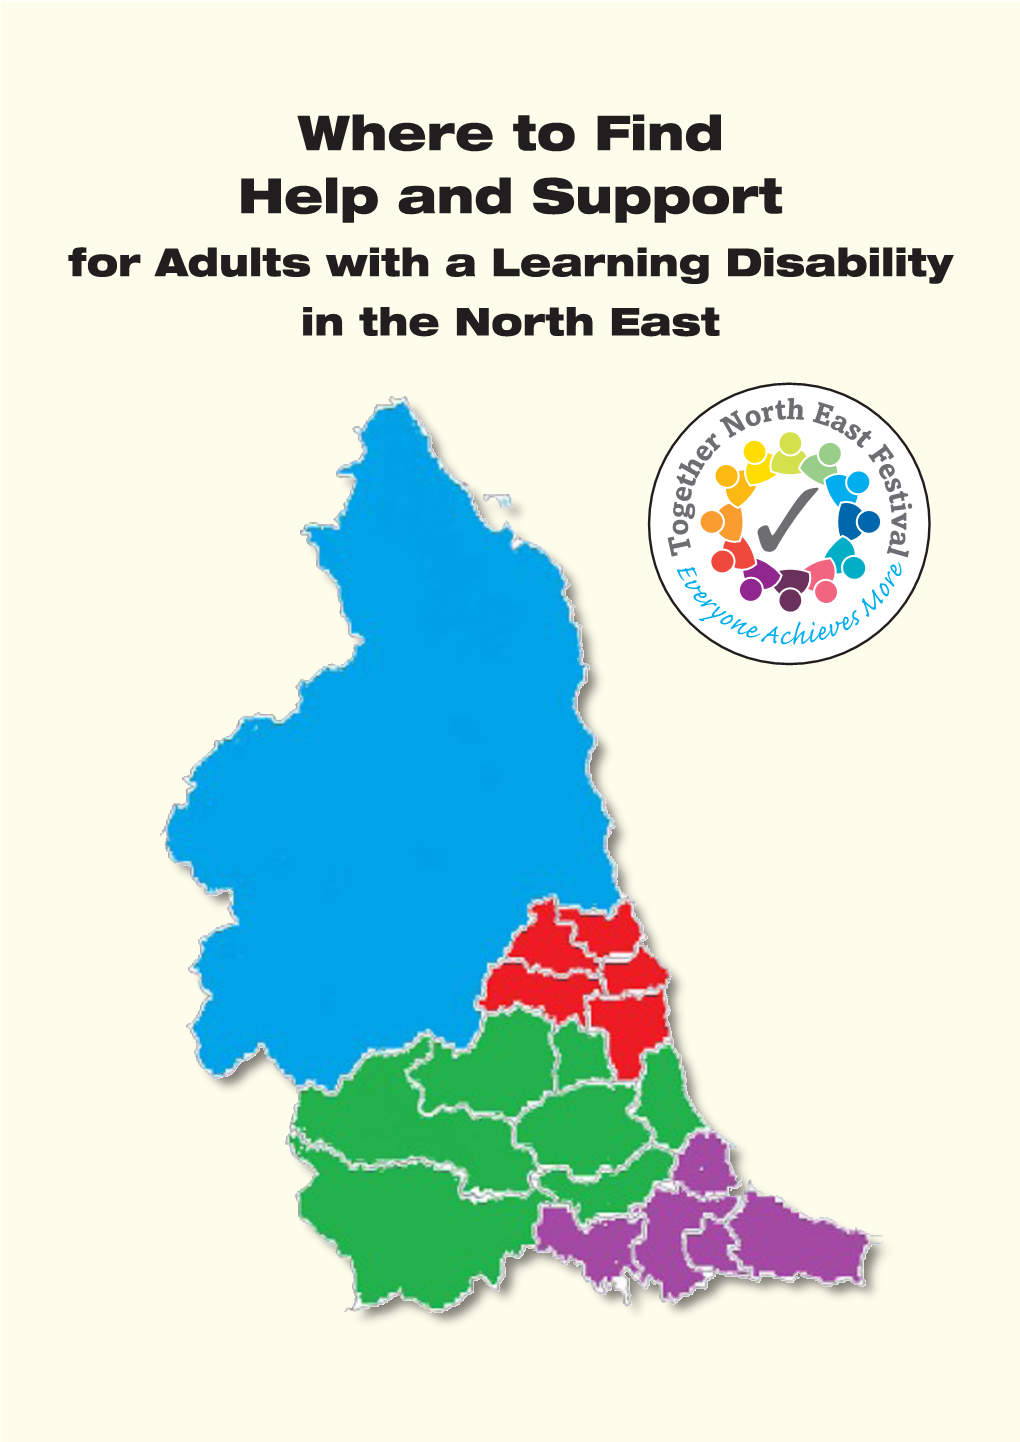 Where to Find Help and Support for Adults with a Learning Disability in the North East Information About